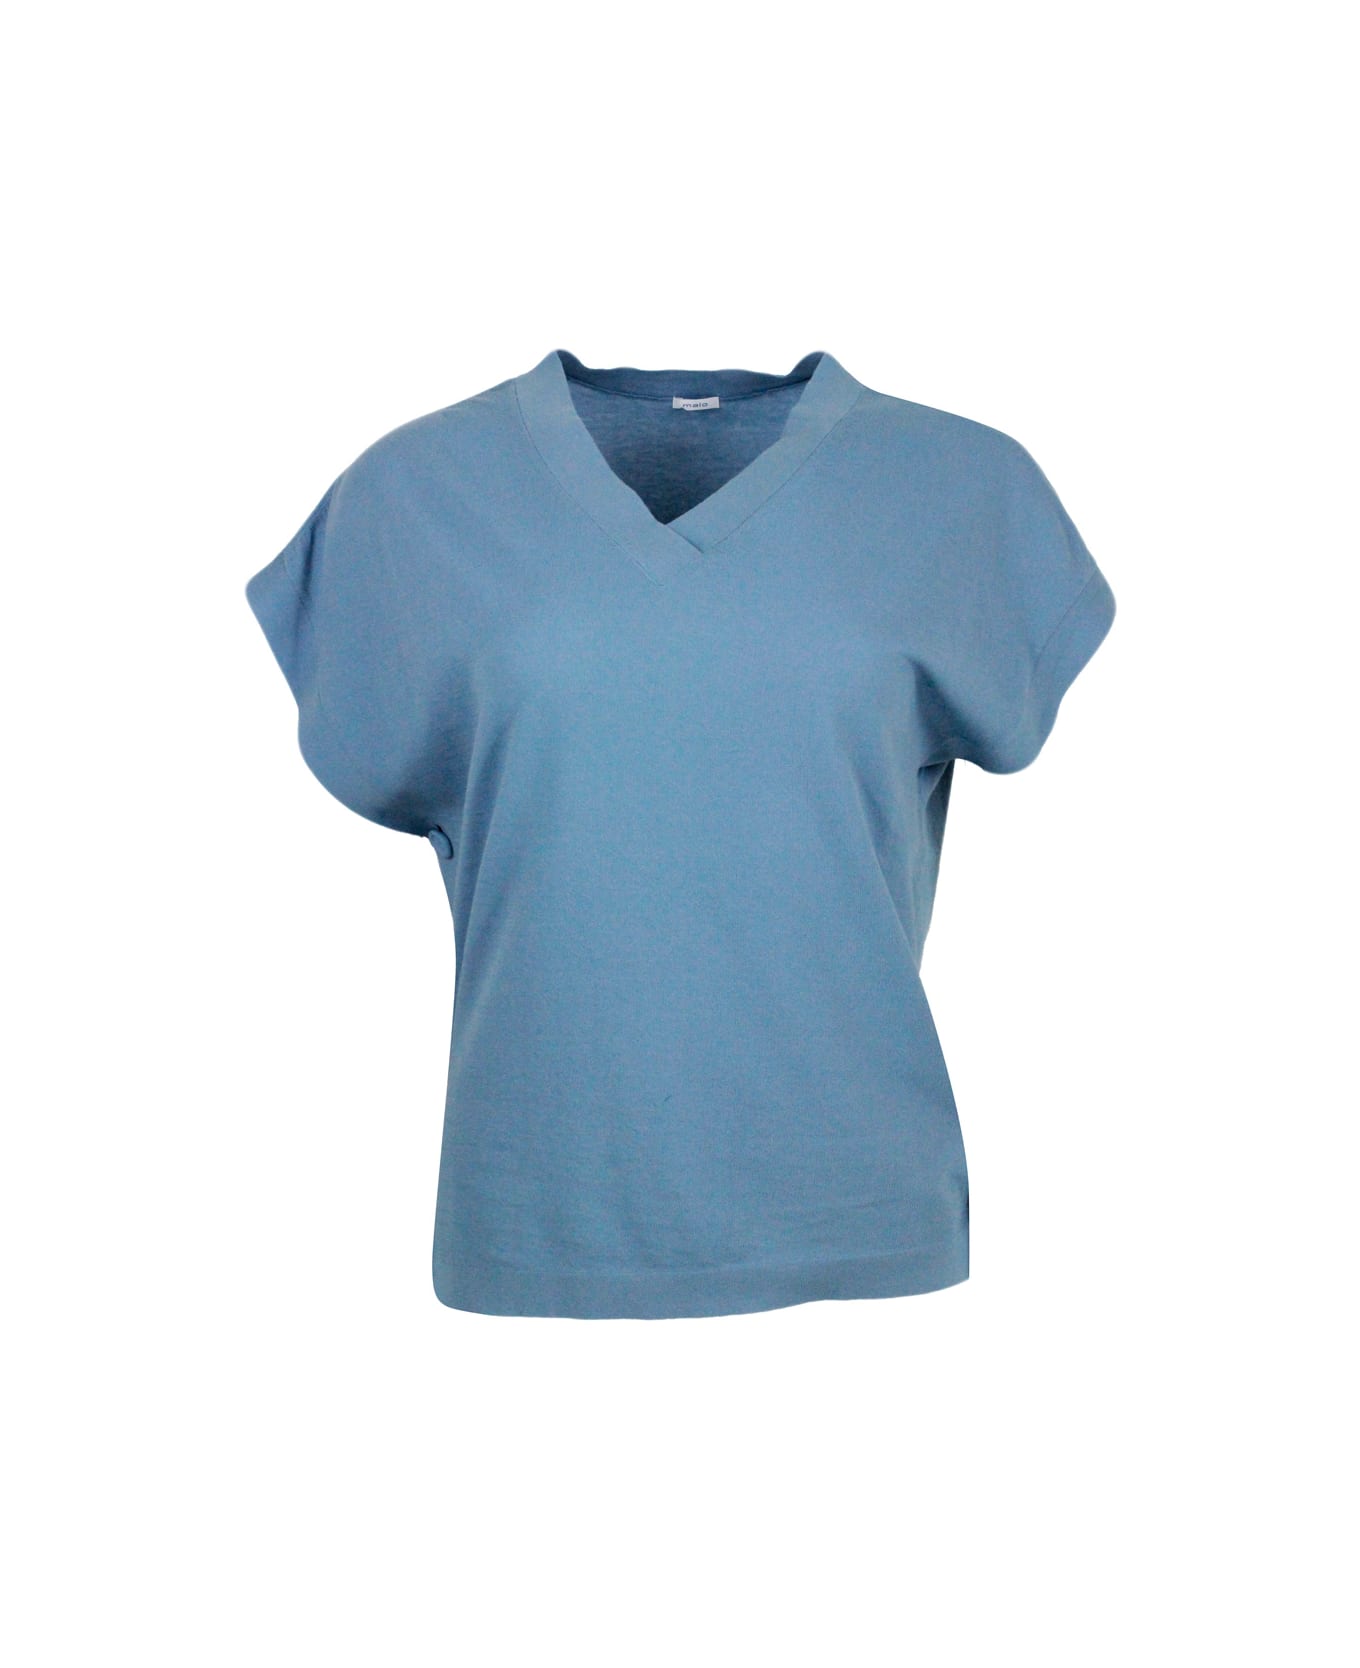 Malo Cotton Sweater With Sleeveless V-neck And Buttons On The Sides - Light Blu Tシャツ